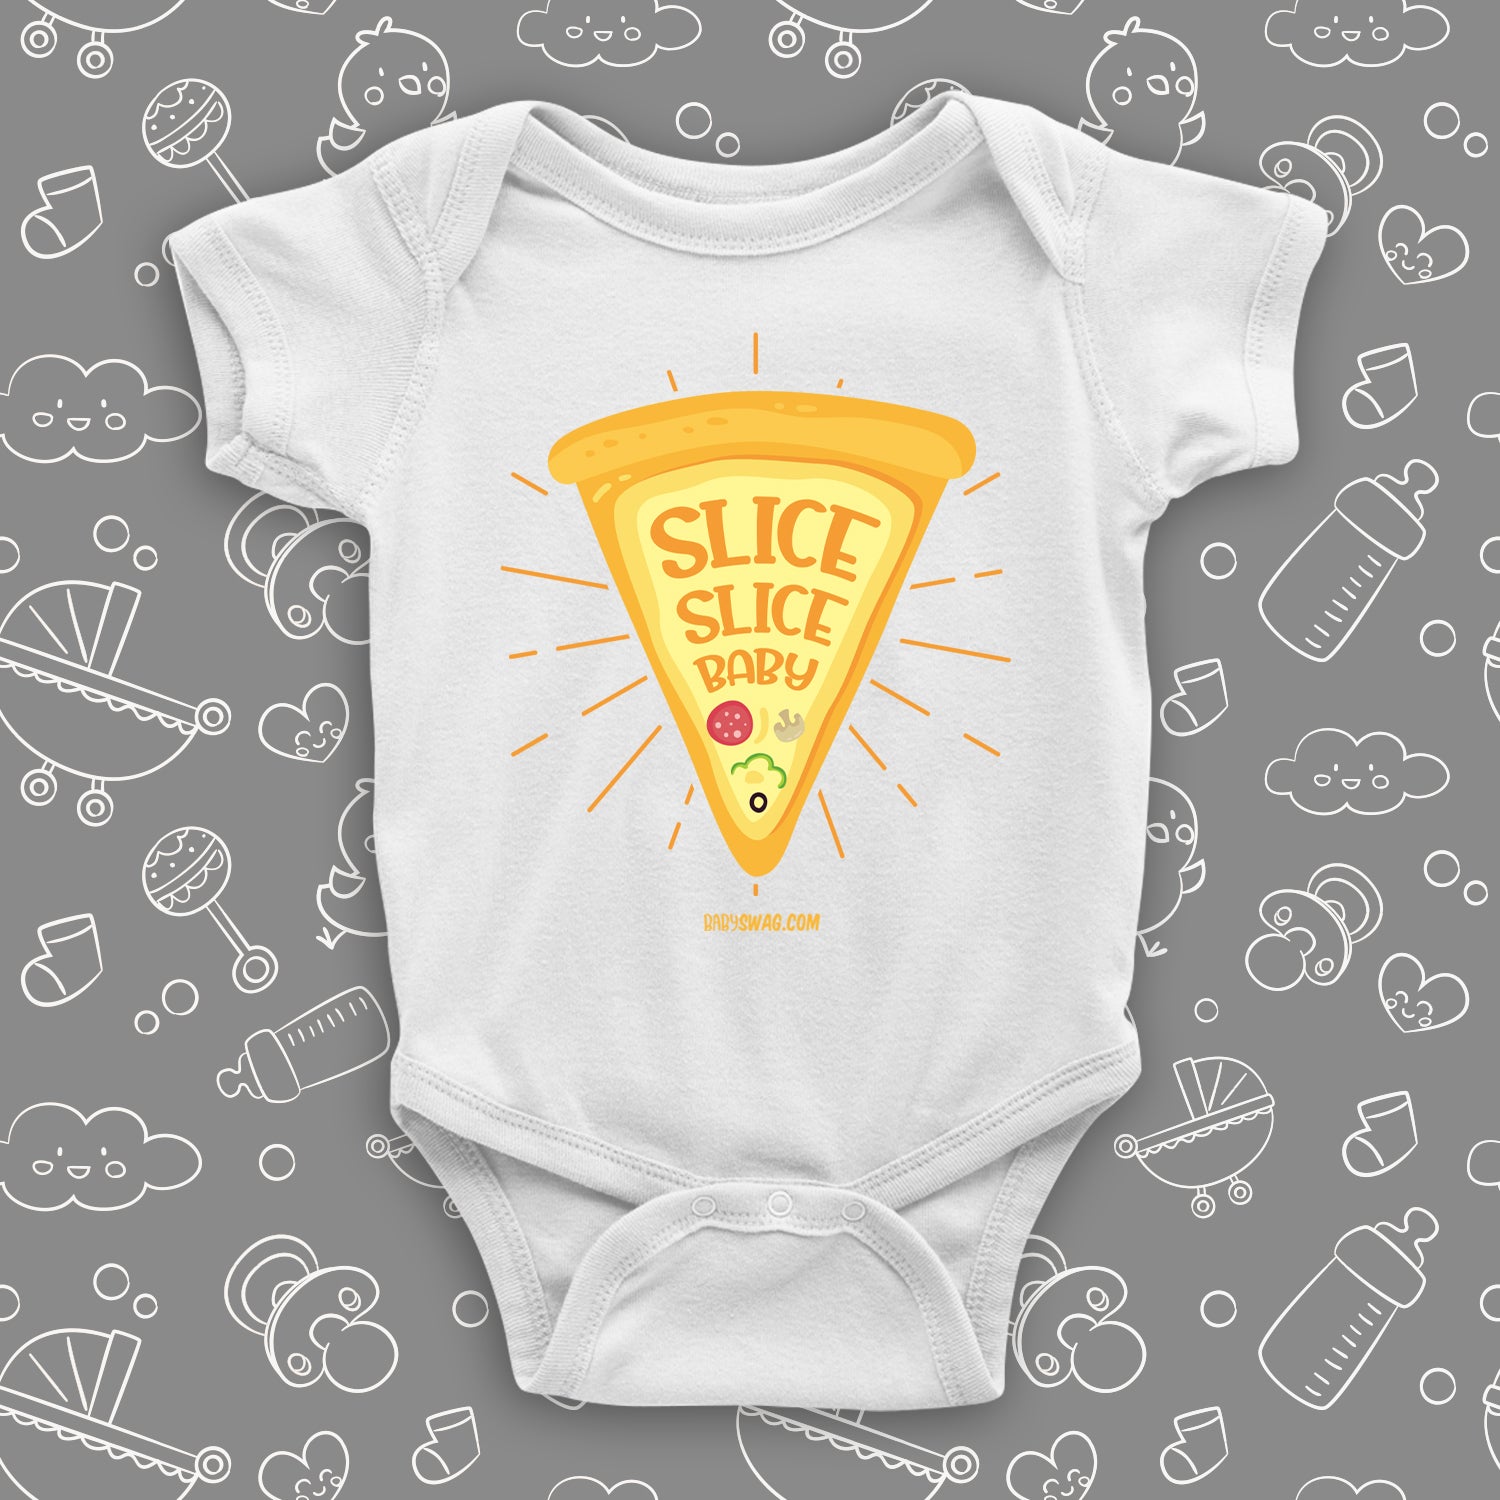 White cool baby onesie with a pizza slice print and "Slice, slice baby" written inside.